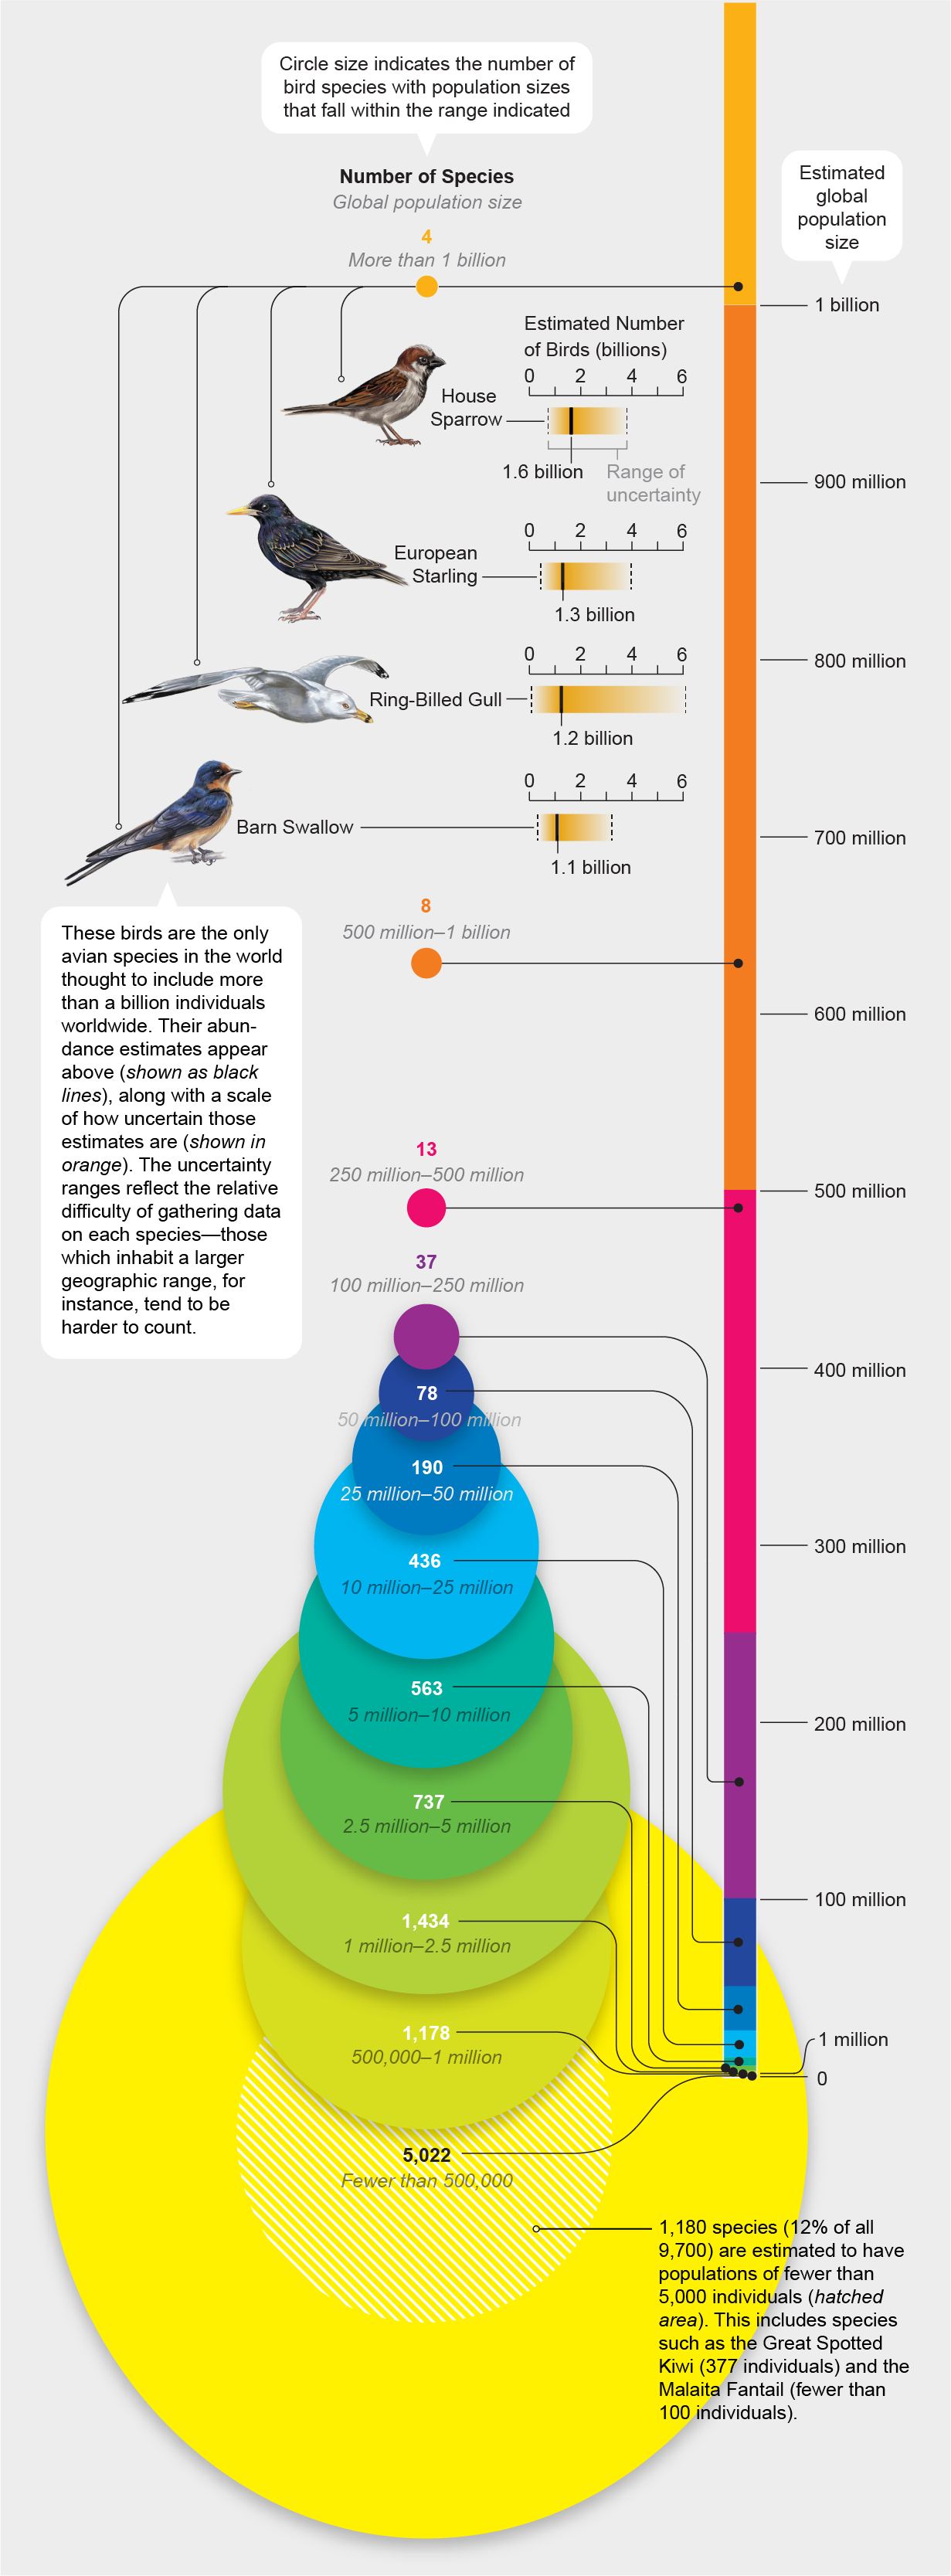 The graph groups birds by population size and displays circles scaled according to the number of species in each group.